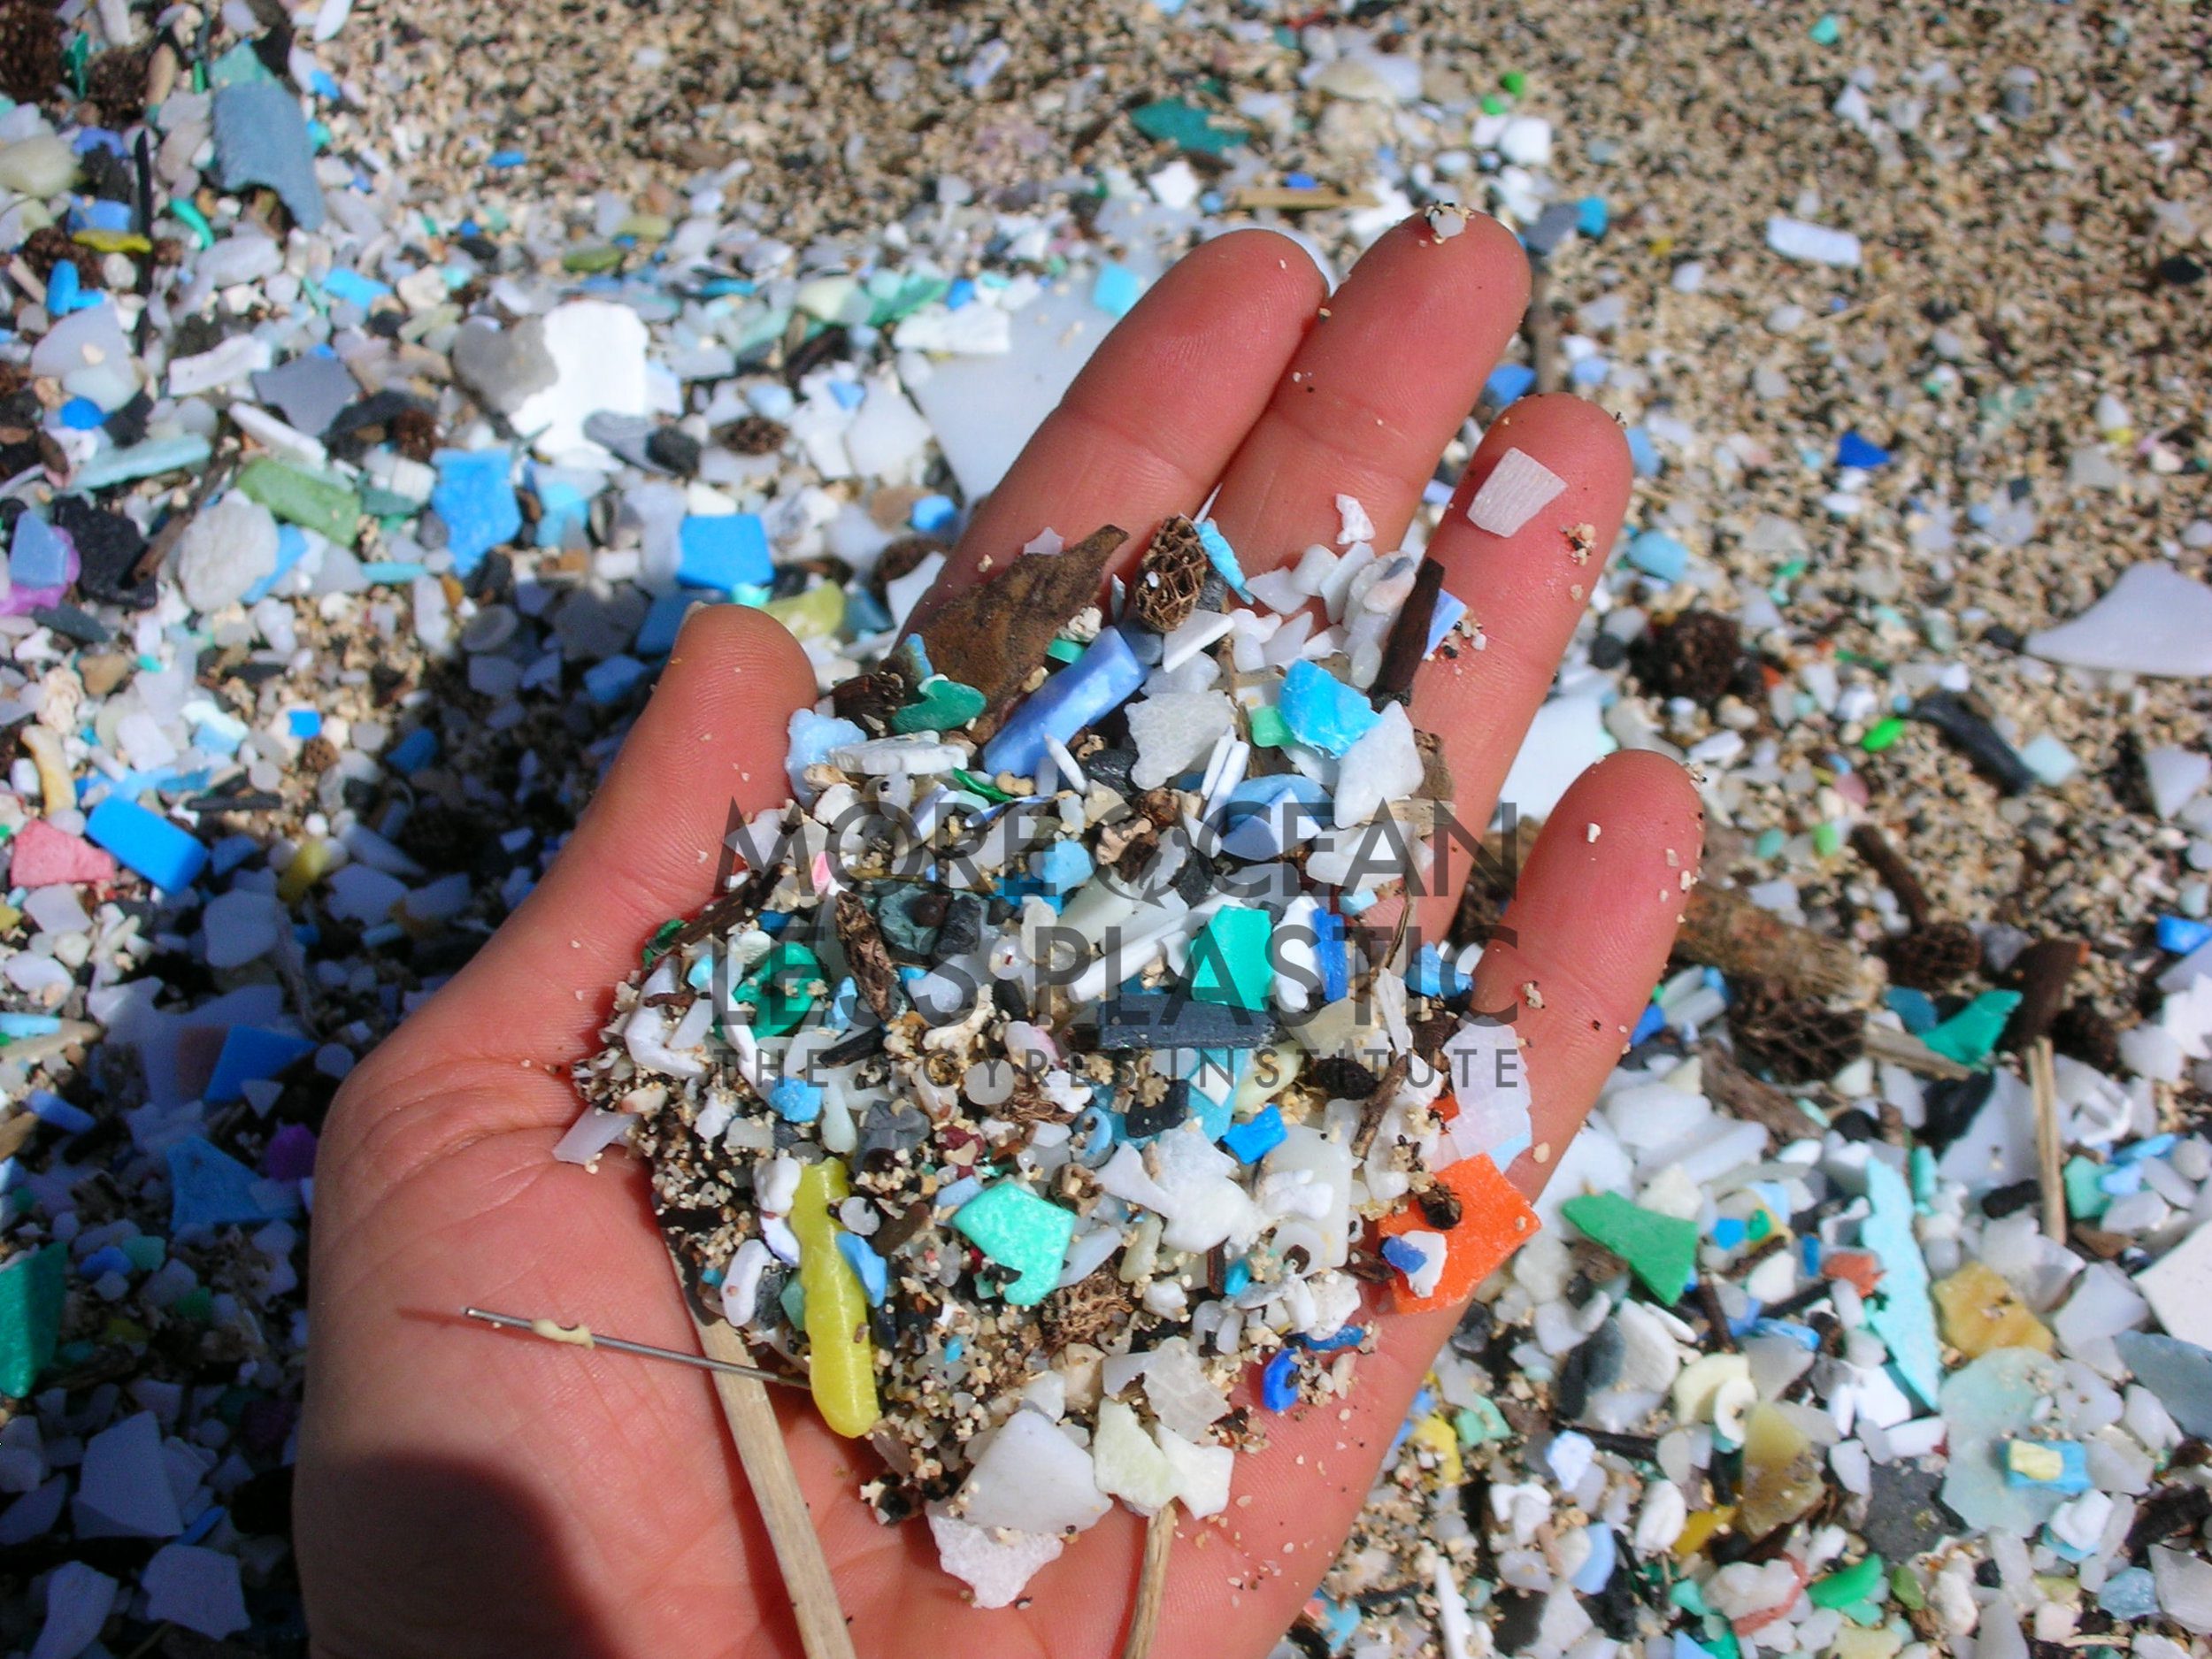 A hand full of sand containing small pieces of plastic pollution.